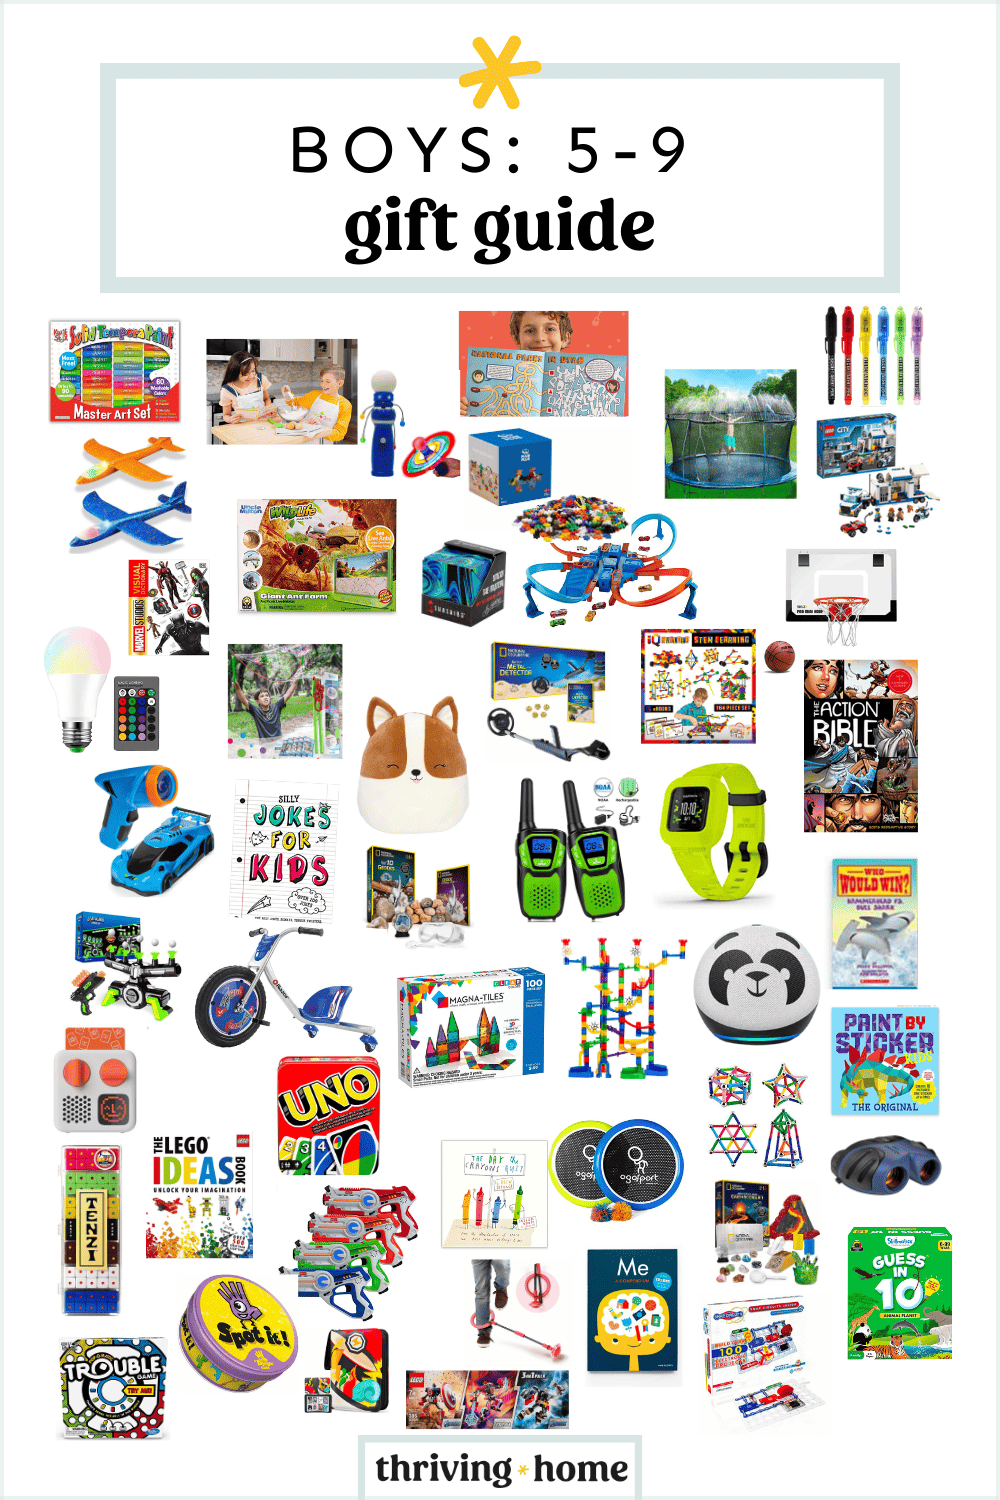 Boys gift guide for 5-9 year olds. 